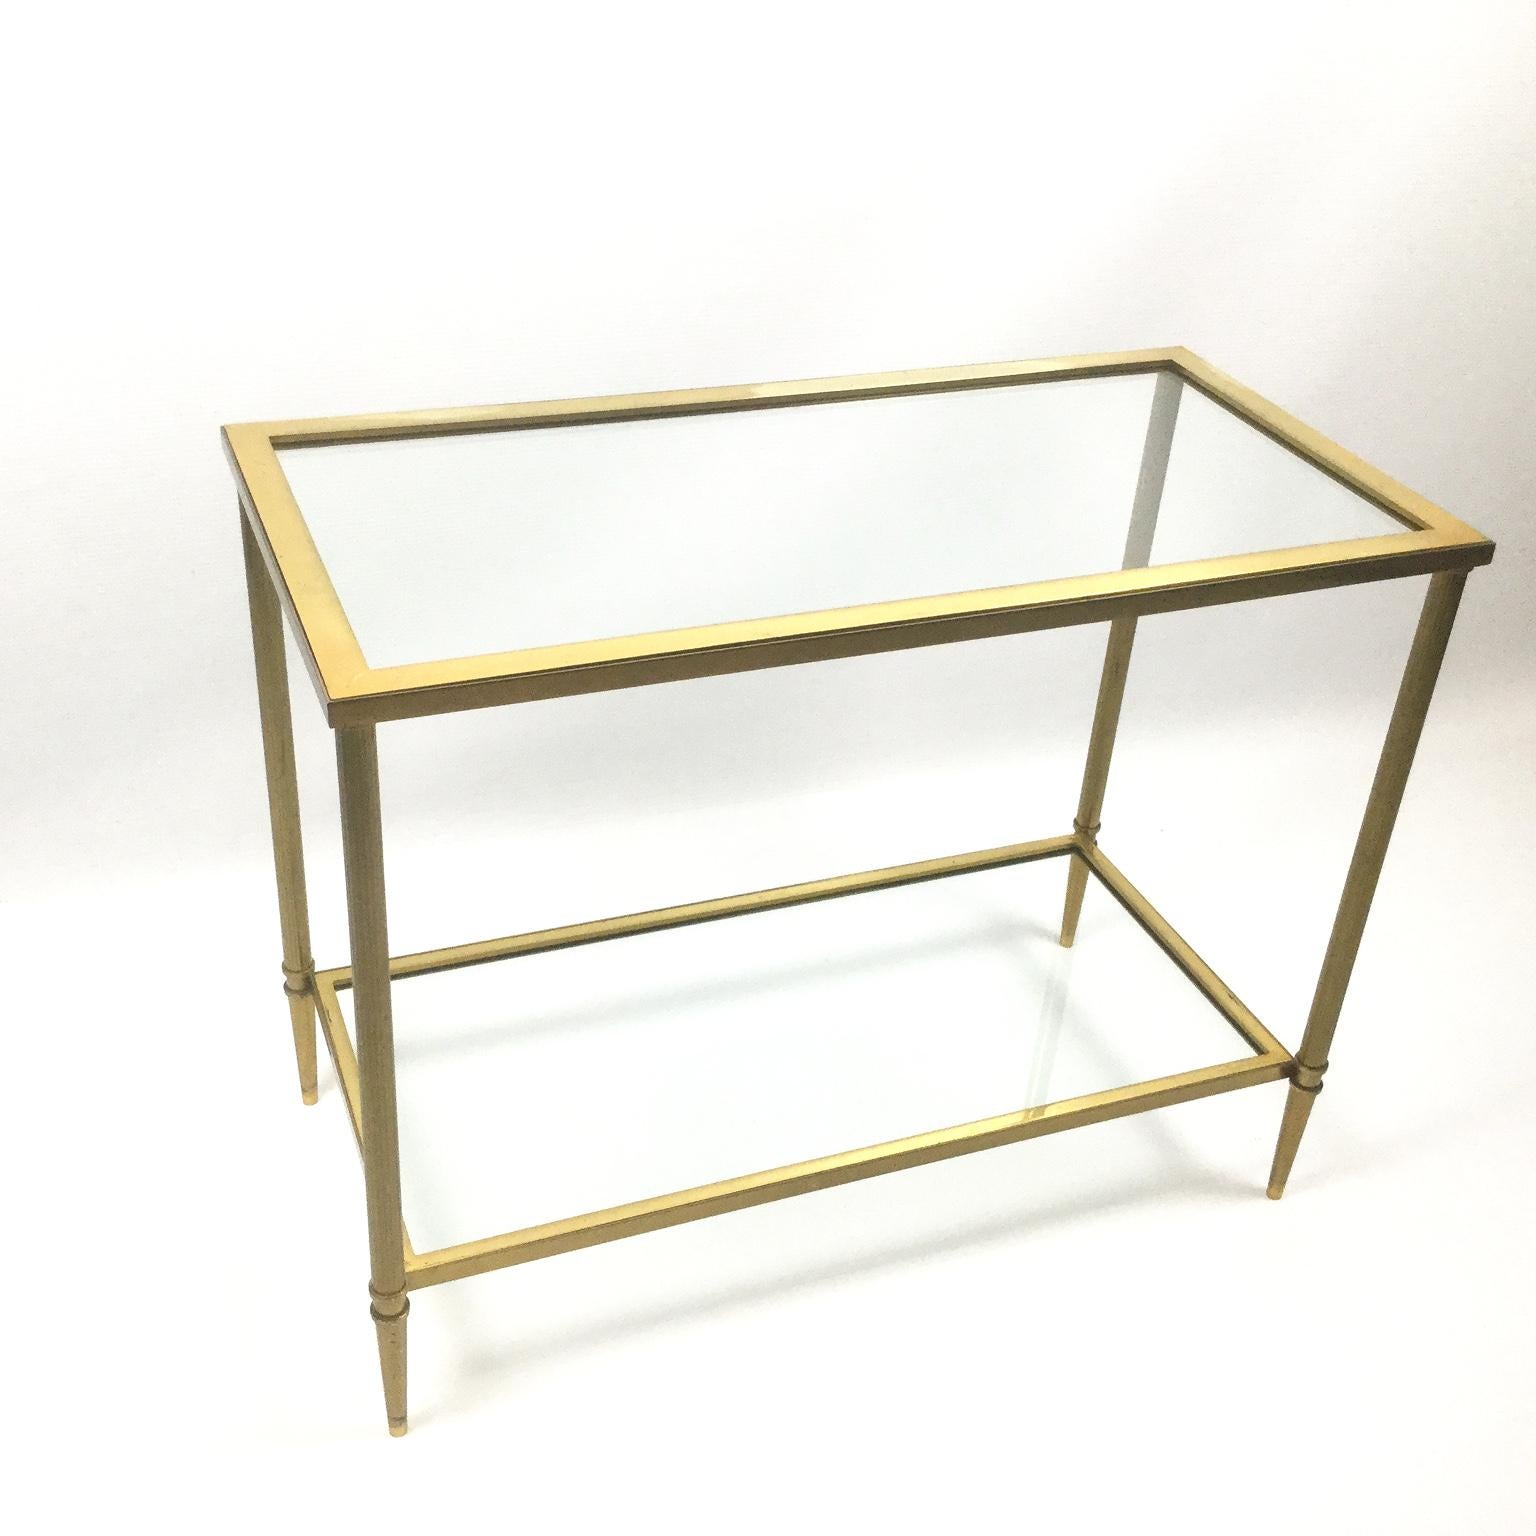 Neoclassical Pair of Brass Console Tables Attributed to Maison Jansen, France, 1970s